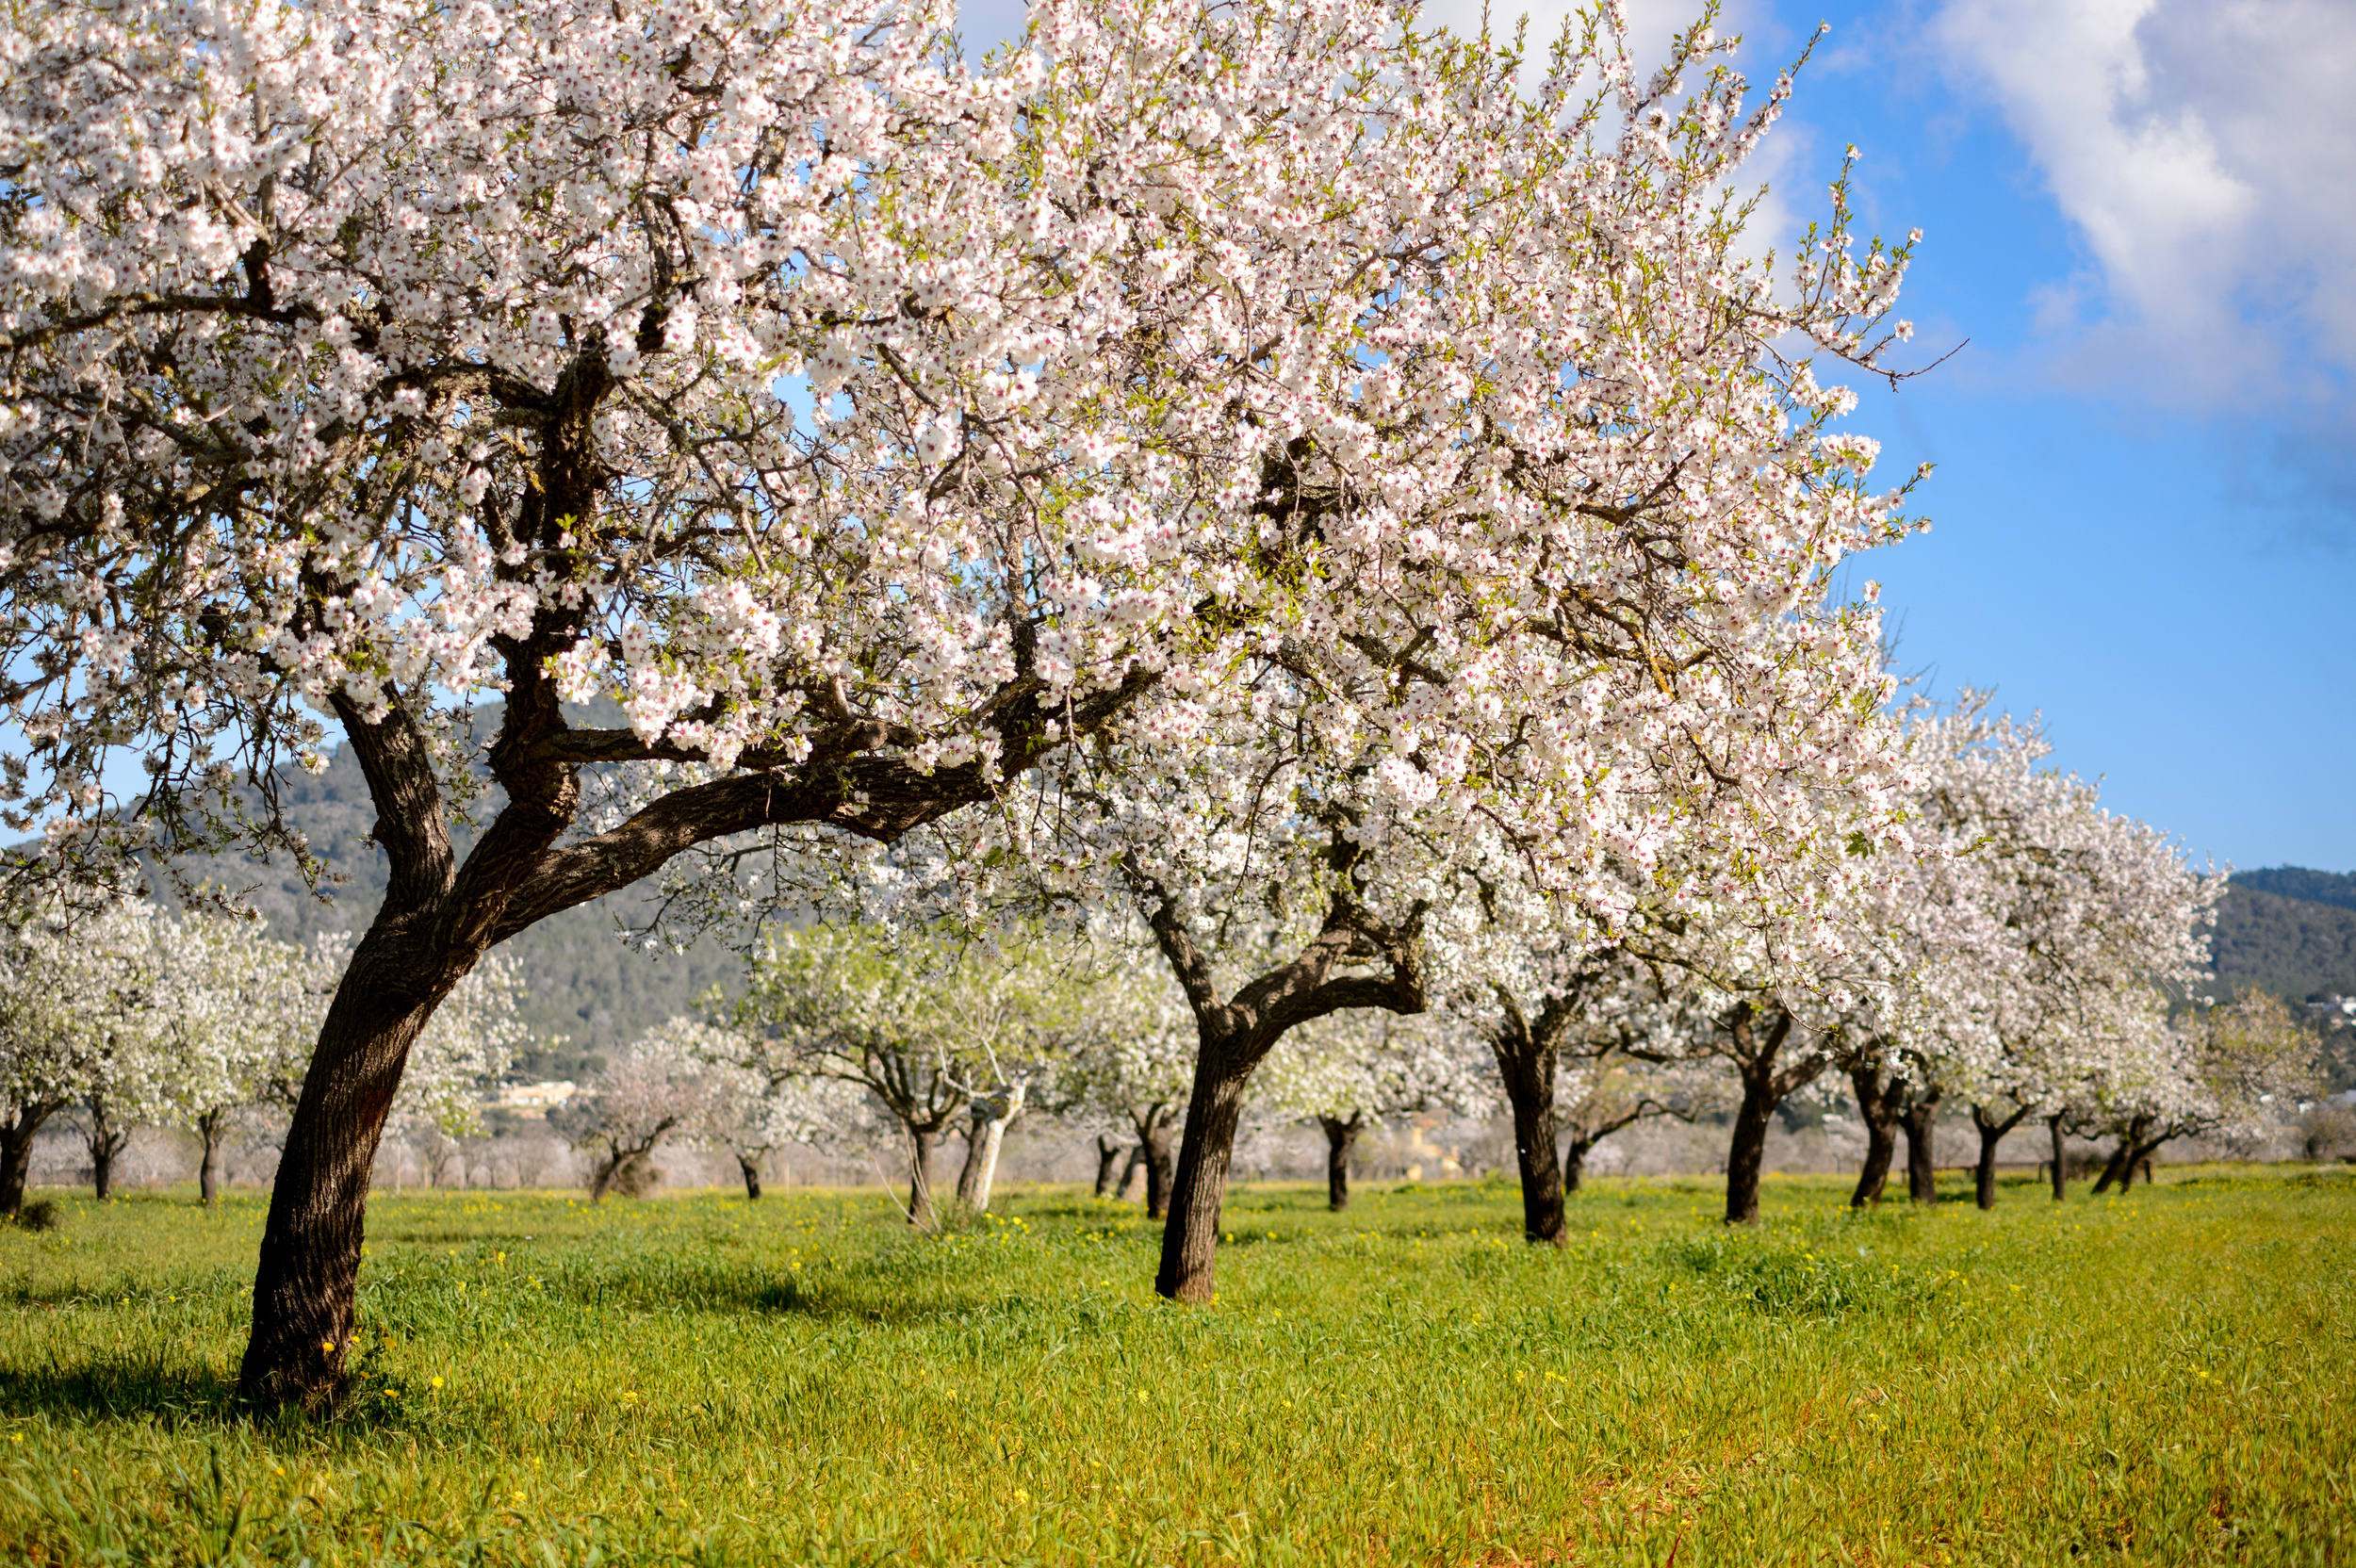 <p>The Pyrenées mountains straddle Spain and France and are perfect for early-season hikes. On the Spanish side, almond trees are known to blossom, providing the most beautiful backdrop for mountain strolls.</p><p>You may also like: <a href='https://www.yardbarker.com/lifestyle/articles/national_bbq_month_21_magnificently_mouth_watering_recipes/s1__37396036'>National BBQ Month: 21 magnificently mouth-watering recipes</a></p>